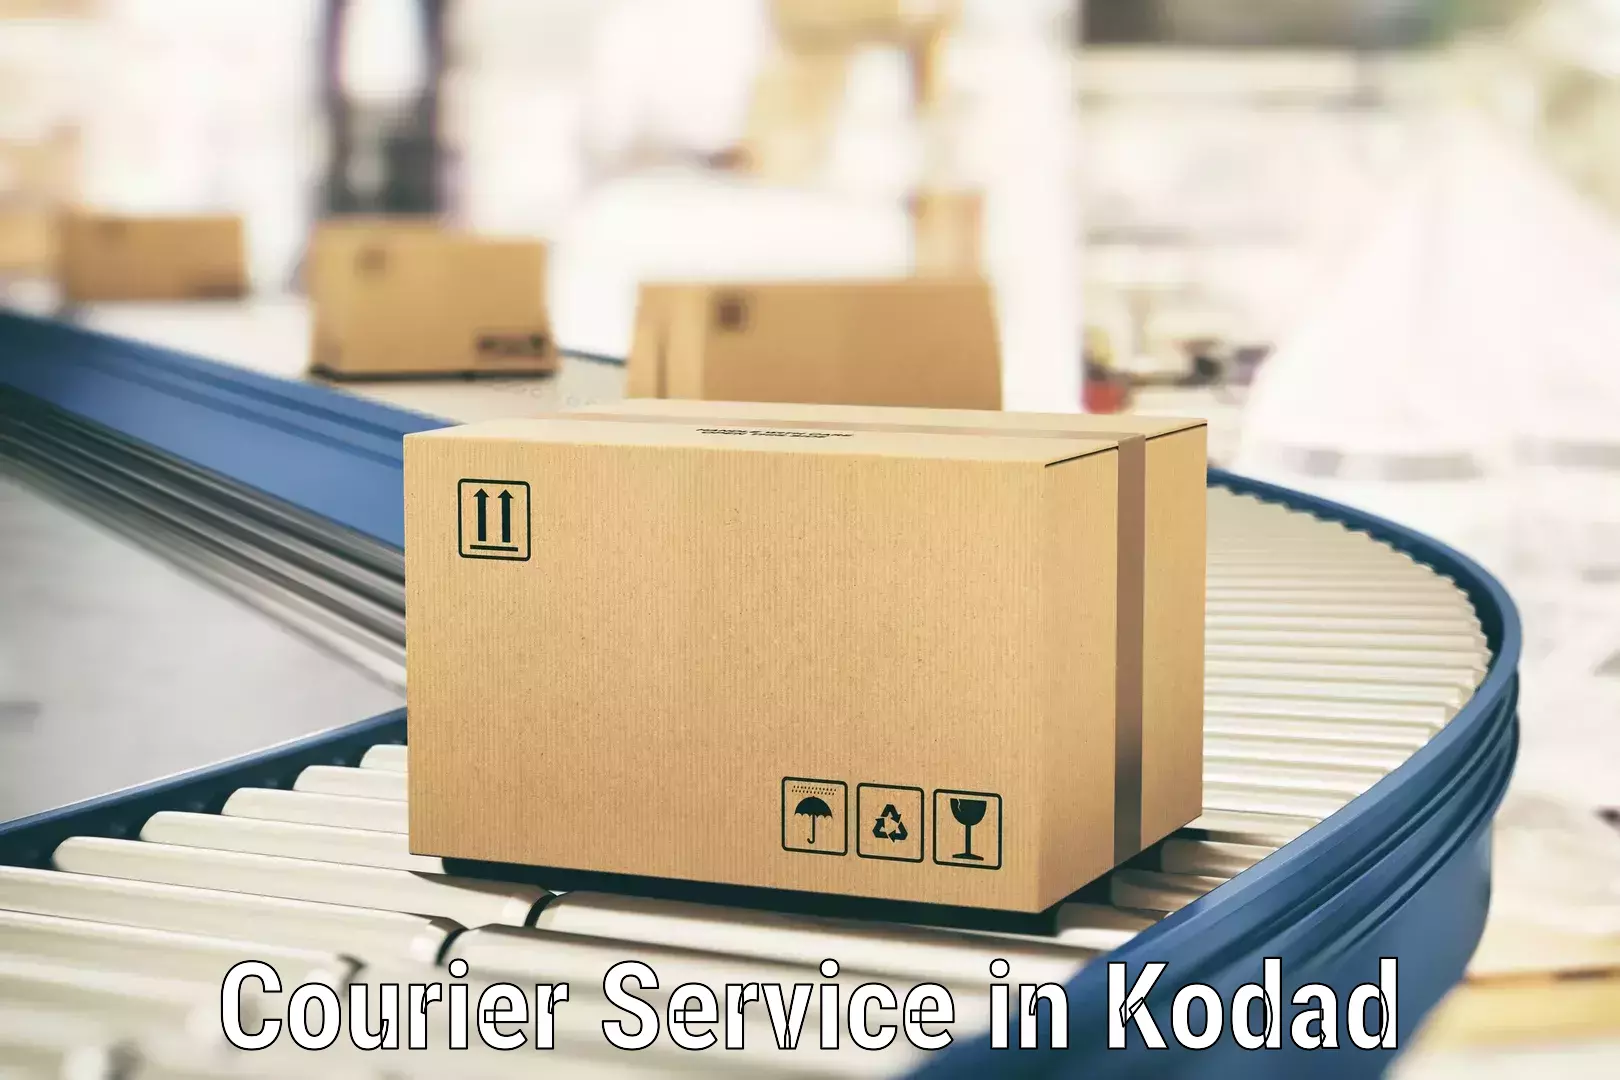 Nationwide courier service in Kodad